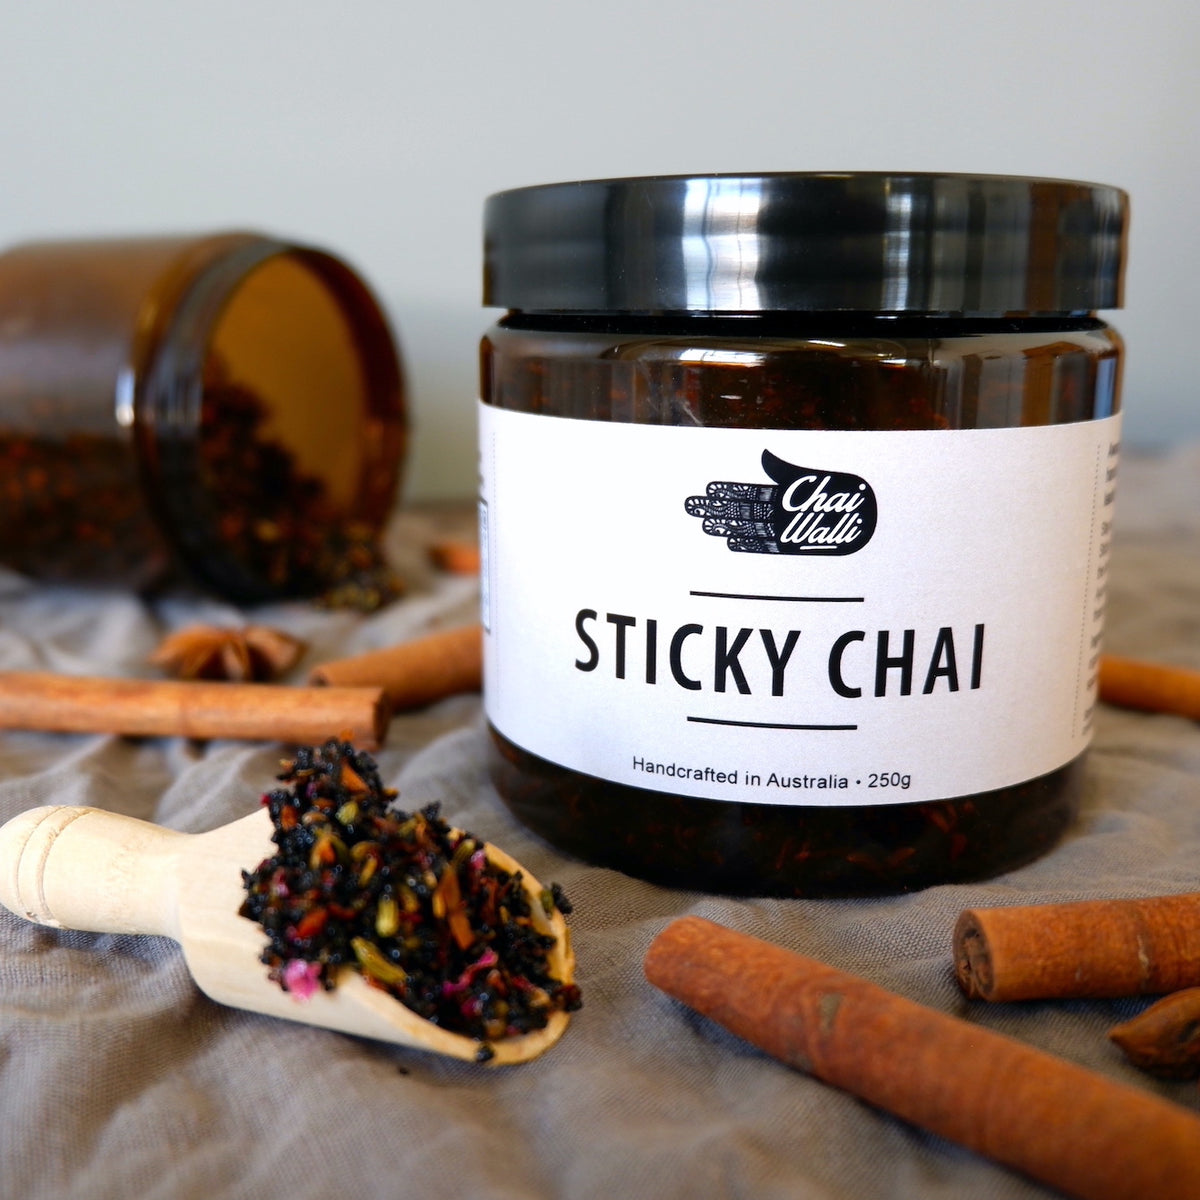 The story behind our Sticky Chai